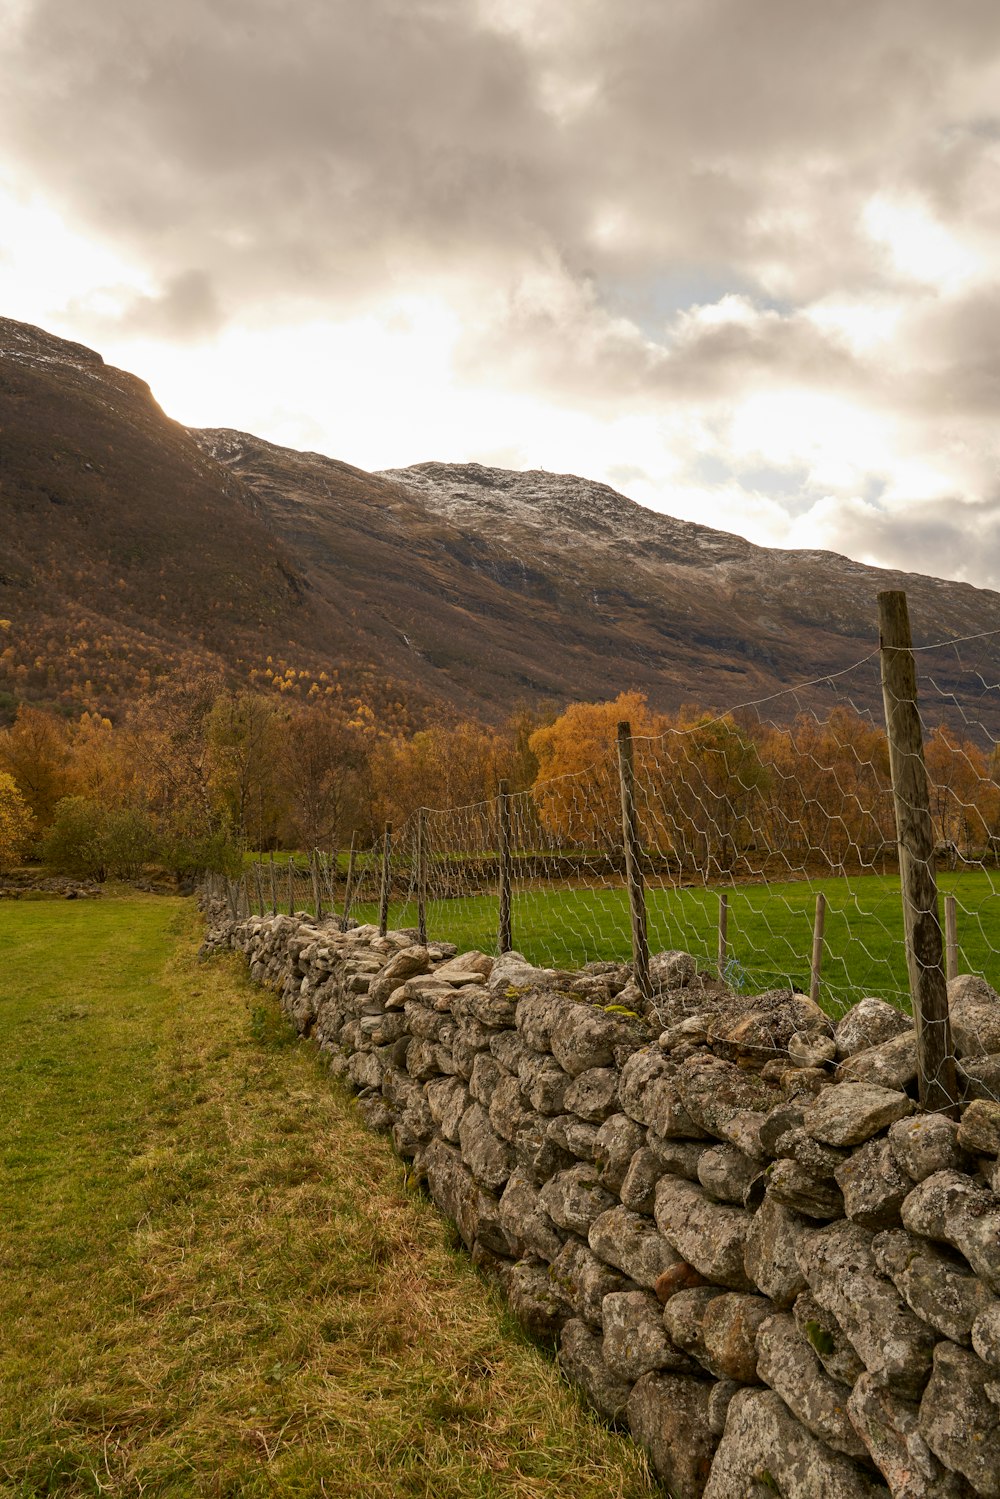 a stone wall in a field with mountains in the background